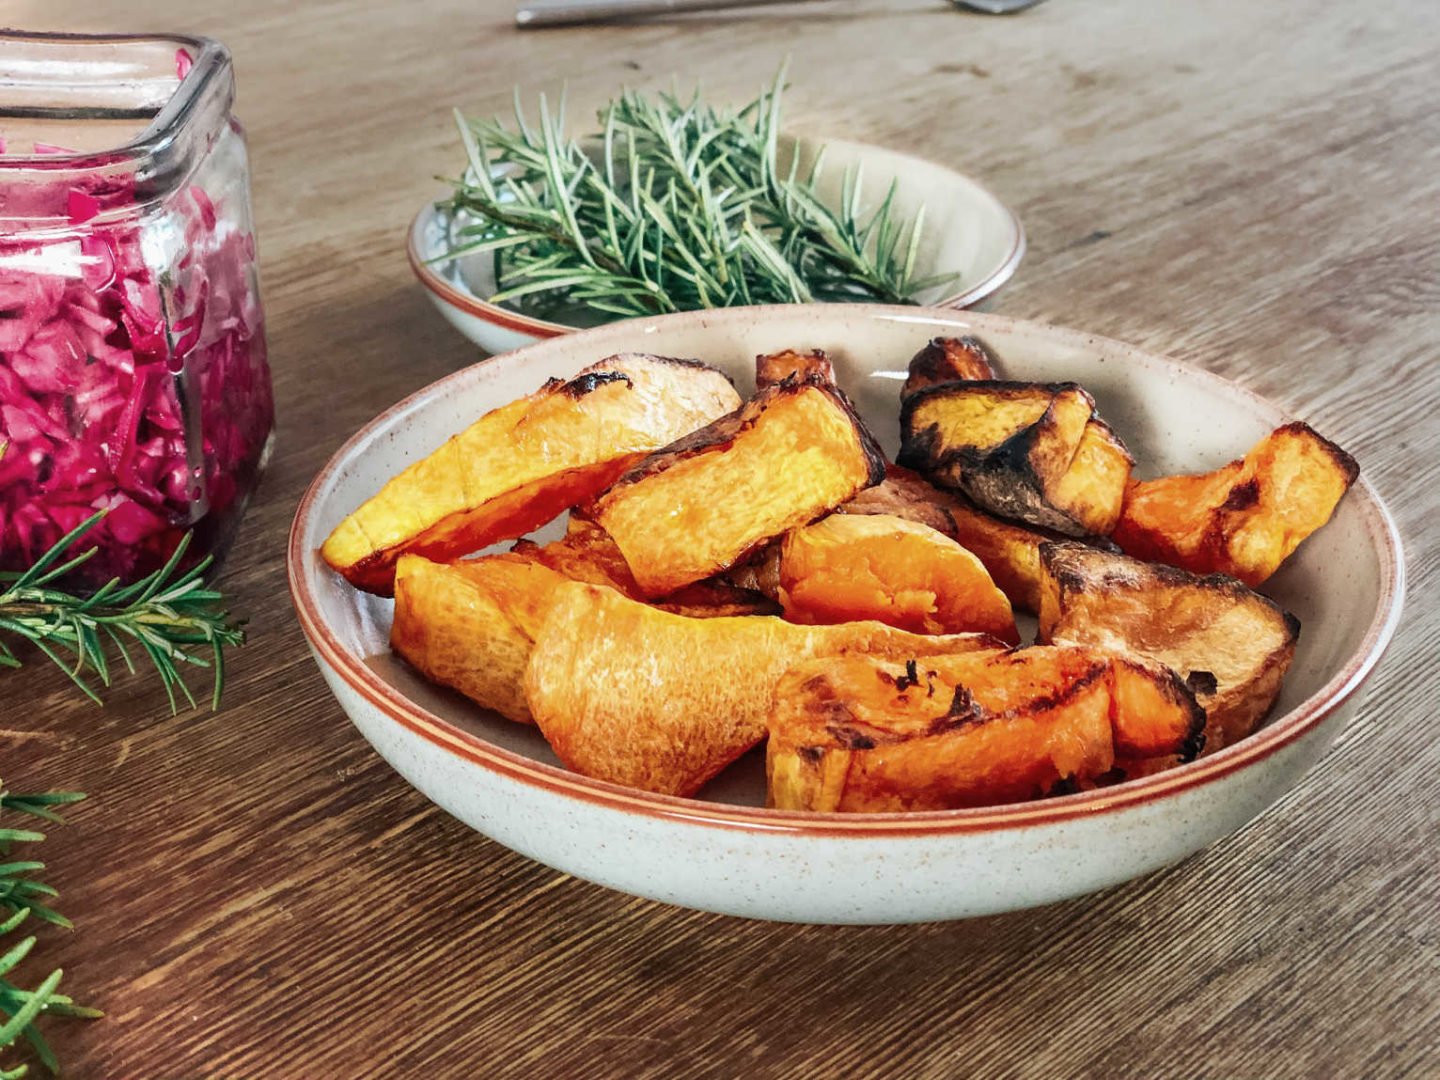 How to cook butternut squash for roast dinner